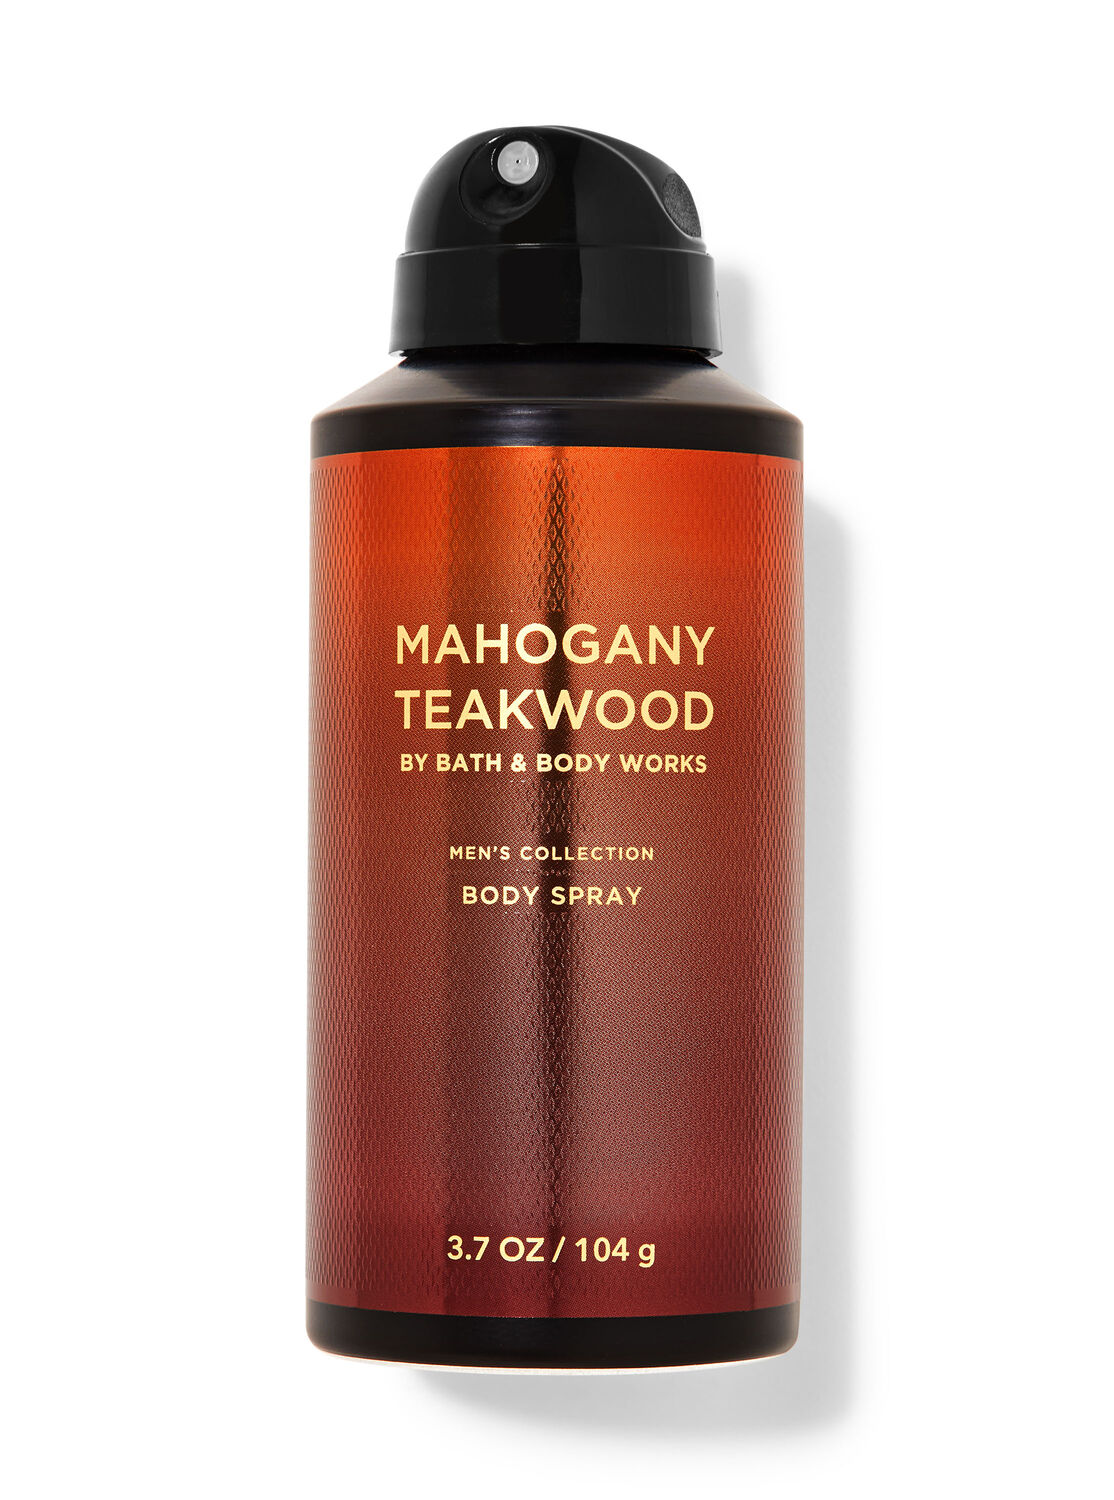  Bath and Body Works Teakwood - Three Piece Men's Collection 8  oz Body Cream, 3.7 oz Deodorizing Body Spray, 10 oz 2-IN-1 Hair and Body  Wash : Beauty & Personal Care